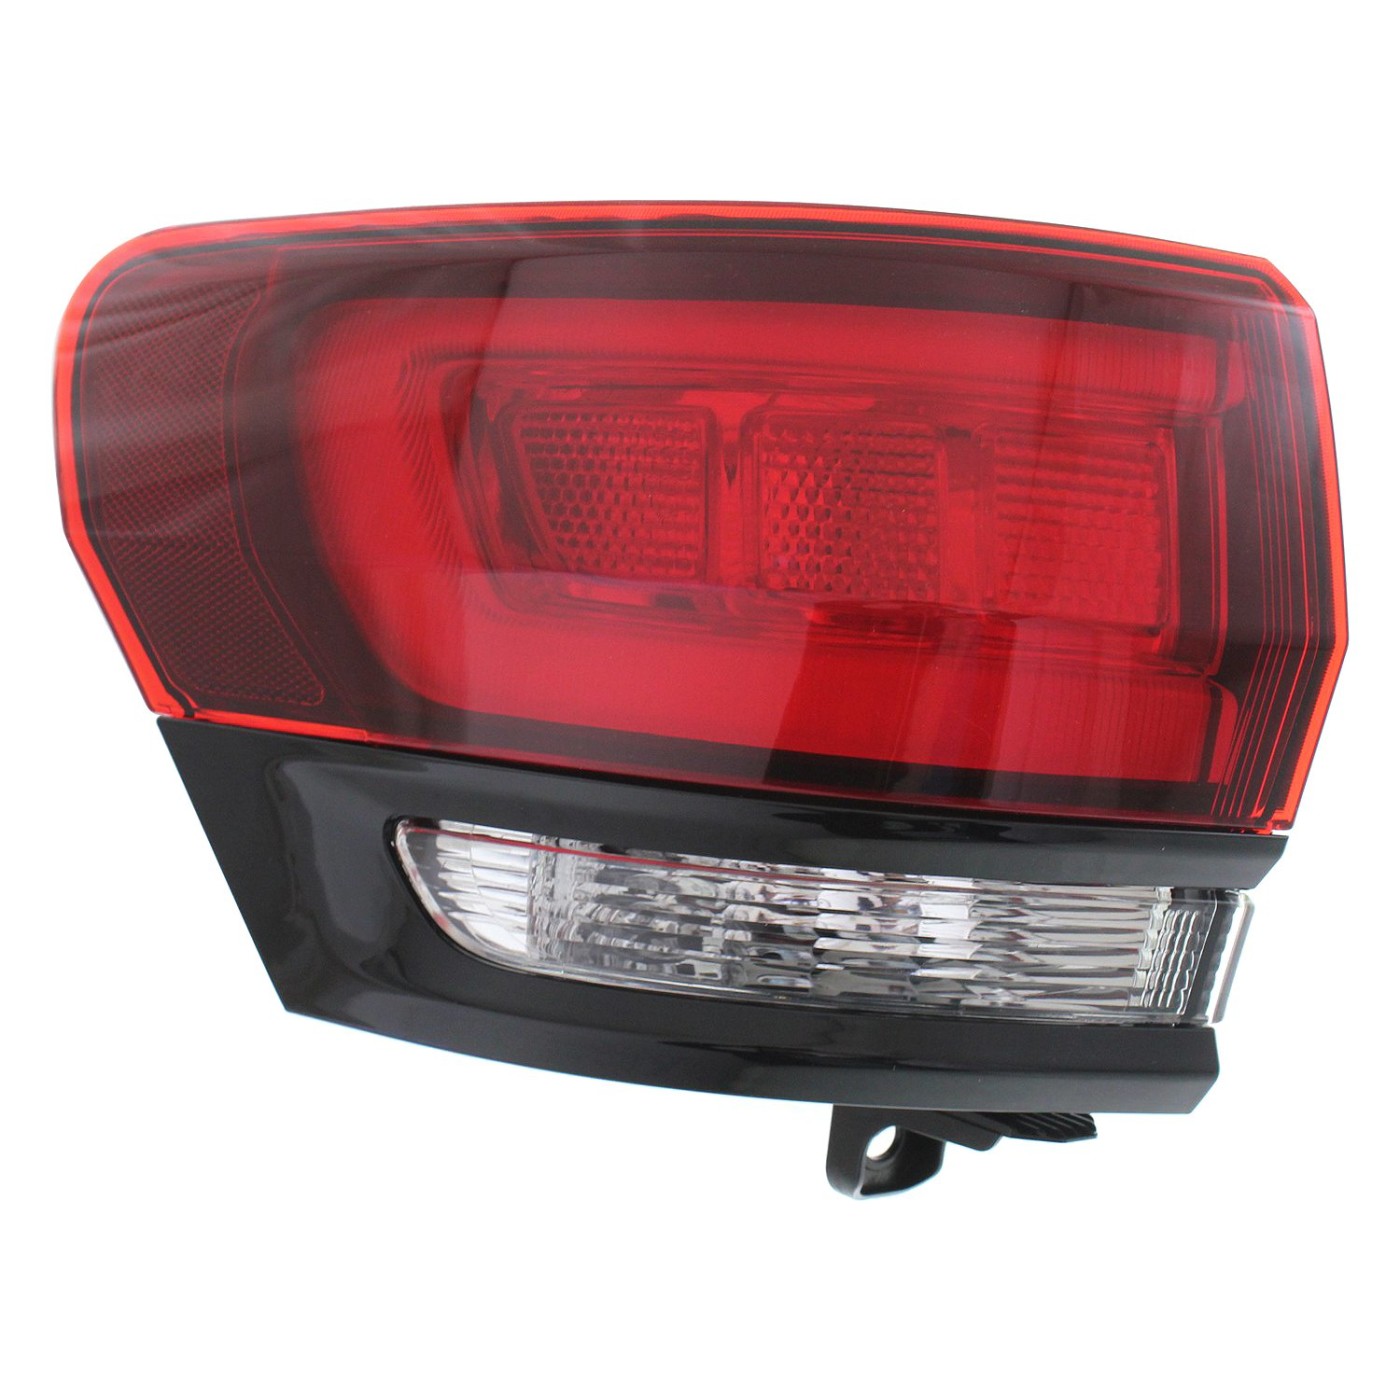 Halogen Tail Light Set For 20142017 Jeep Grand Cherokee